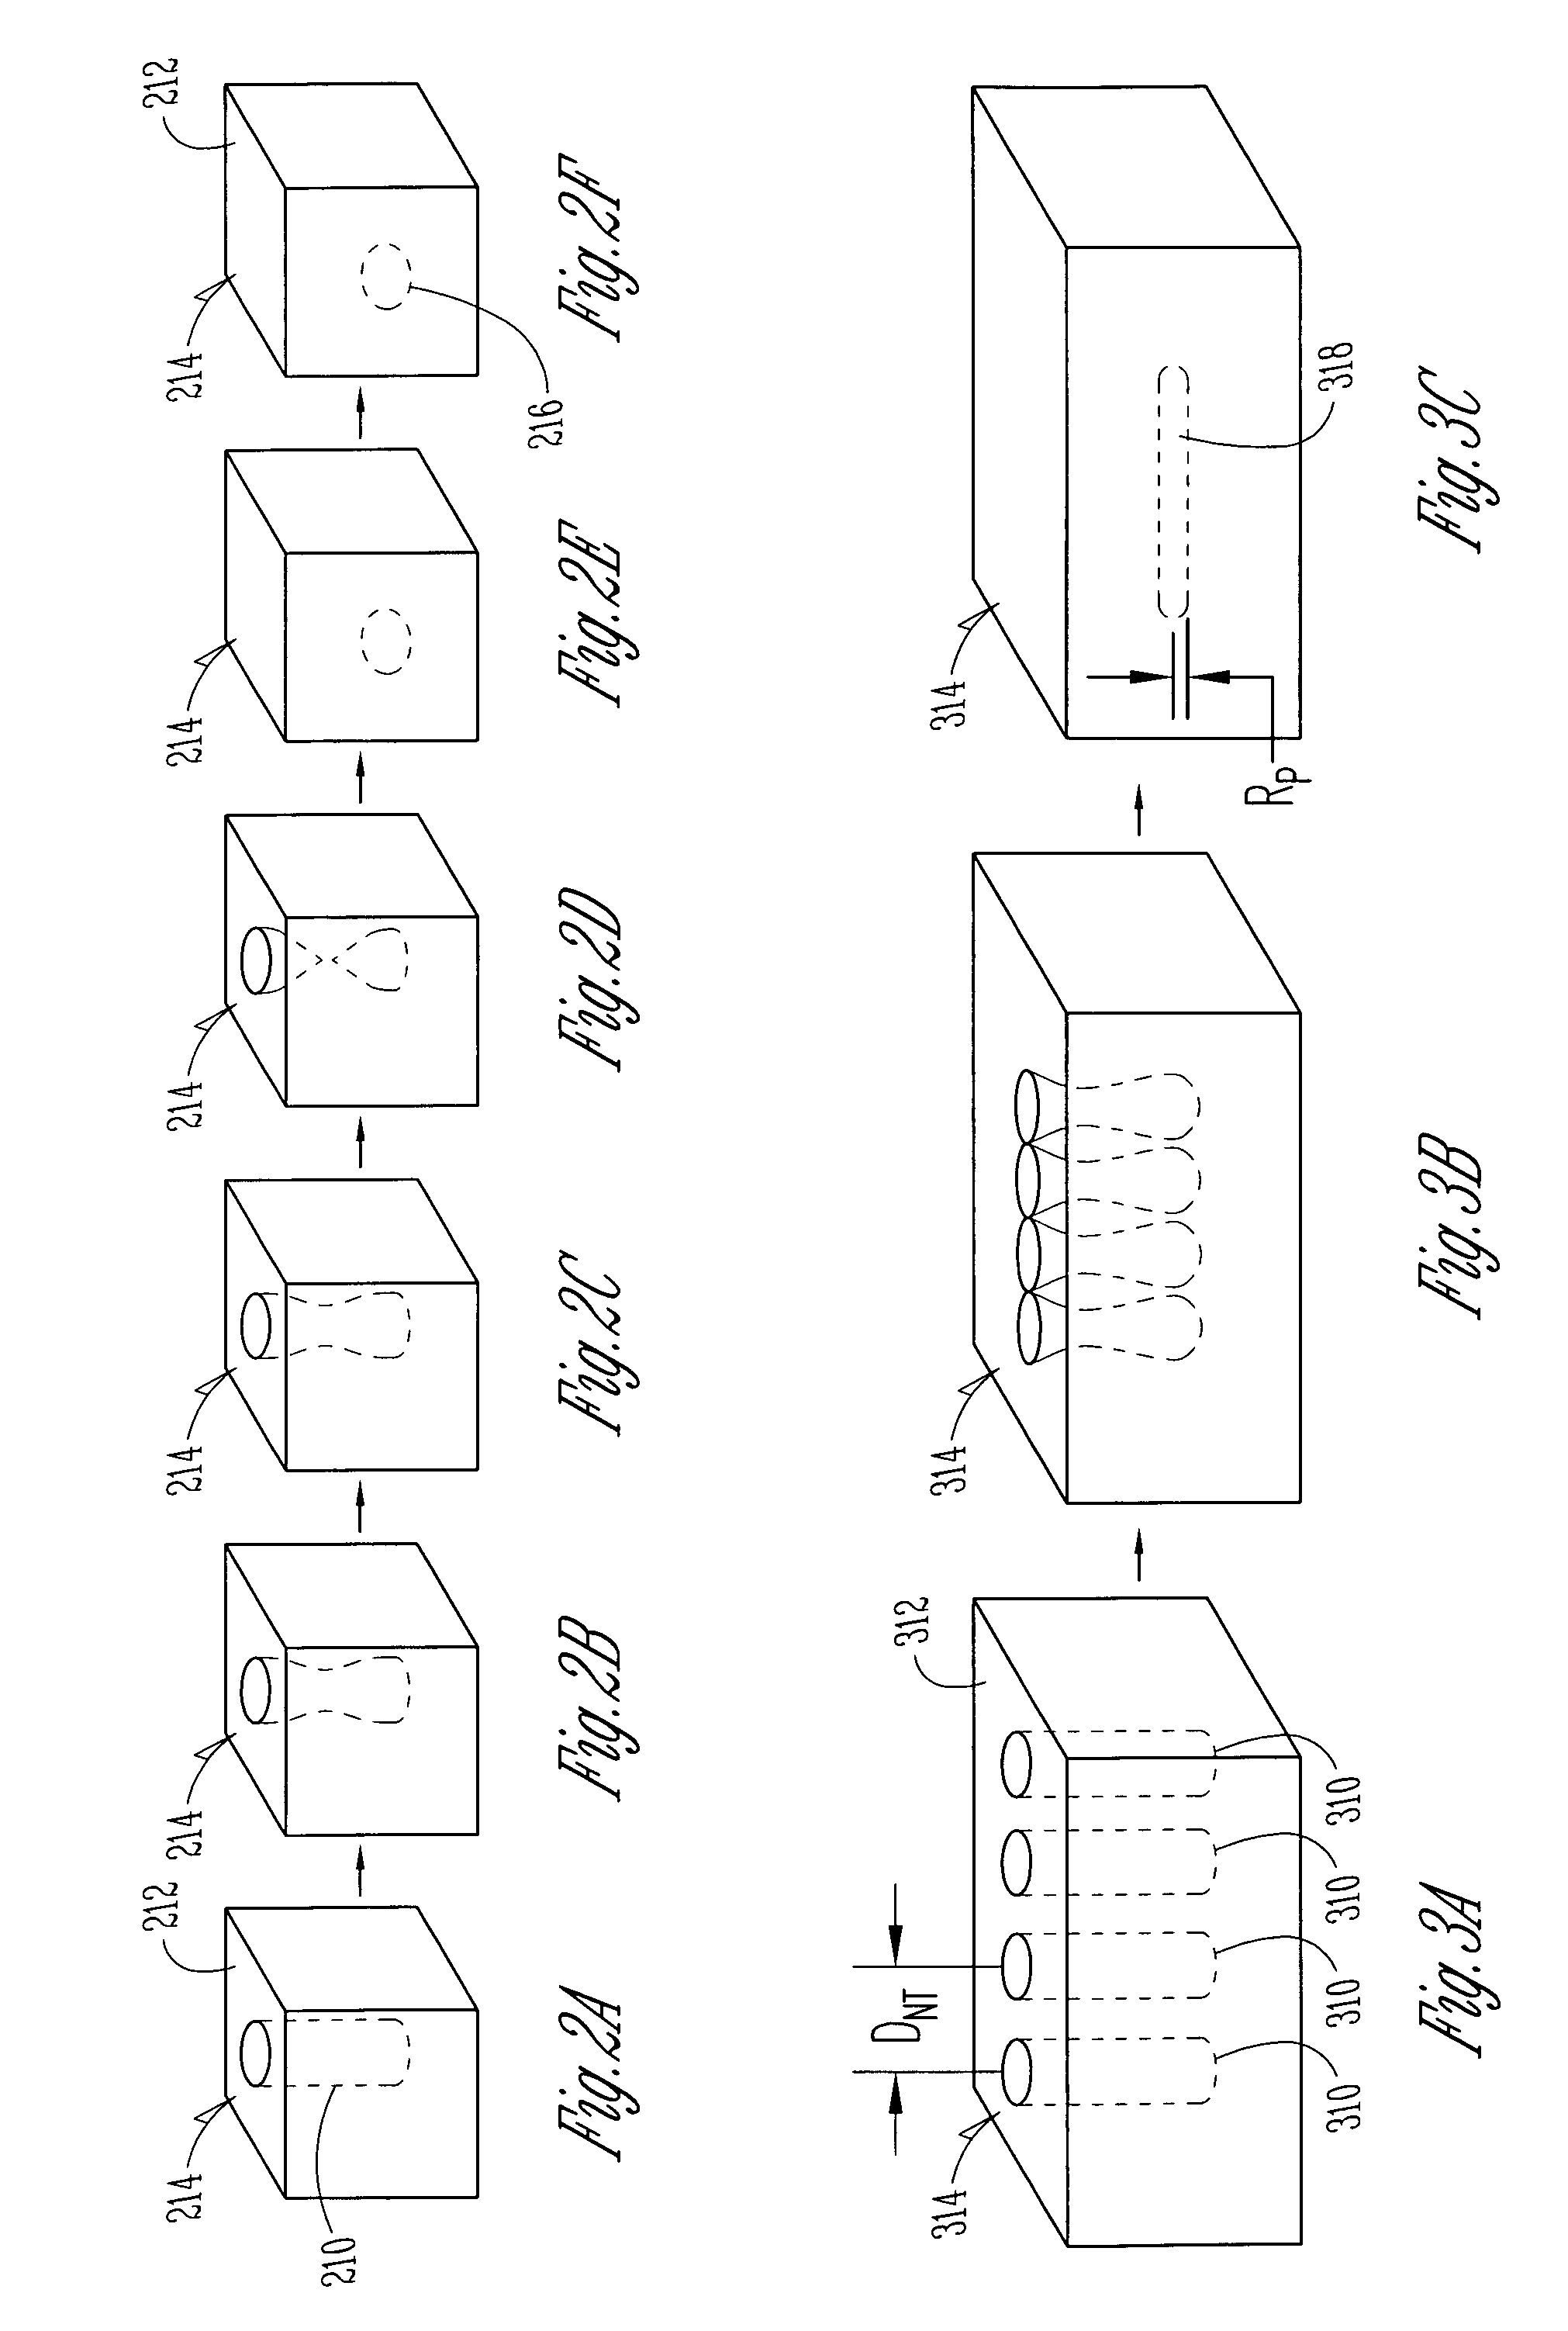 Low k interconnect dielectric using surface transformation